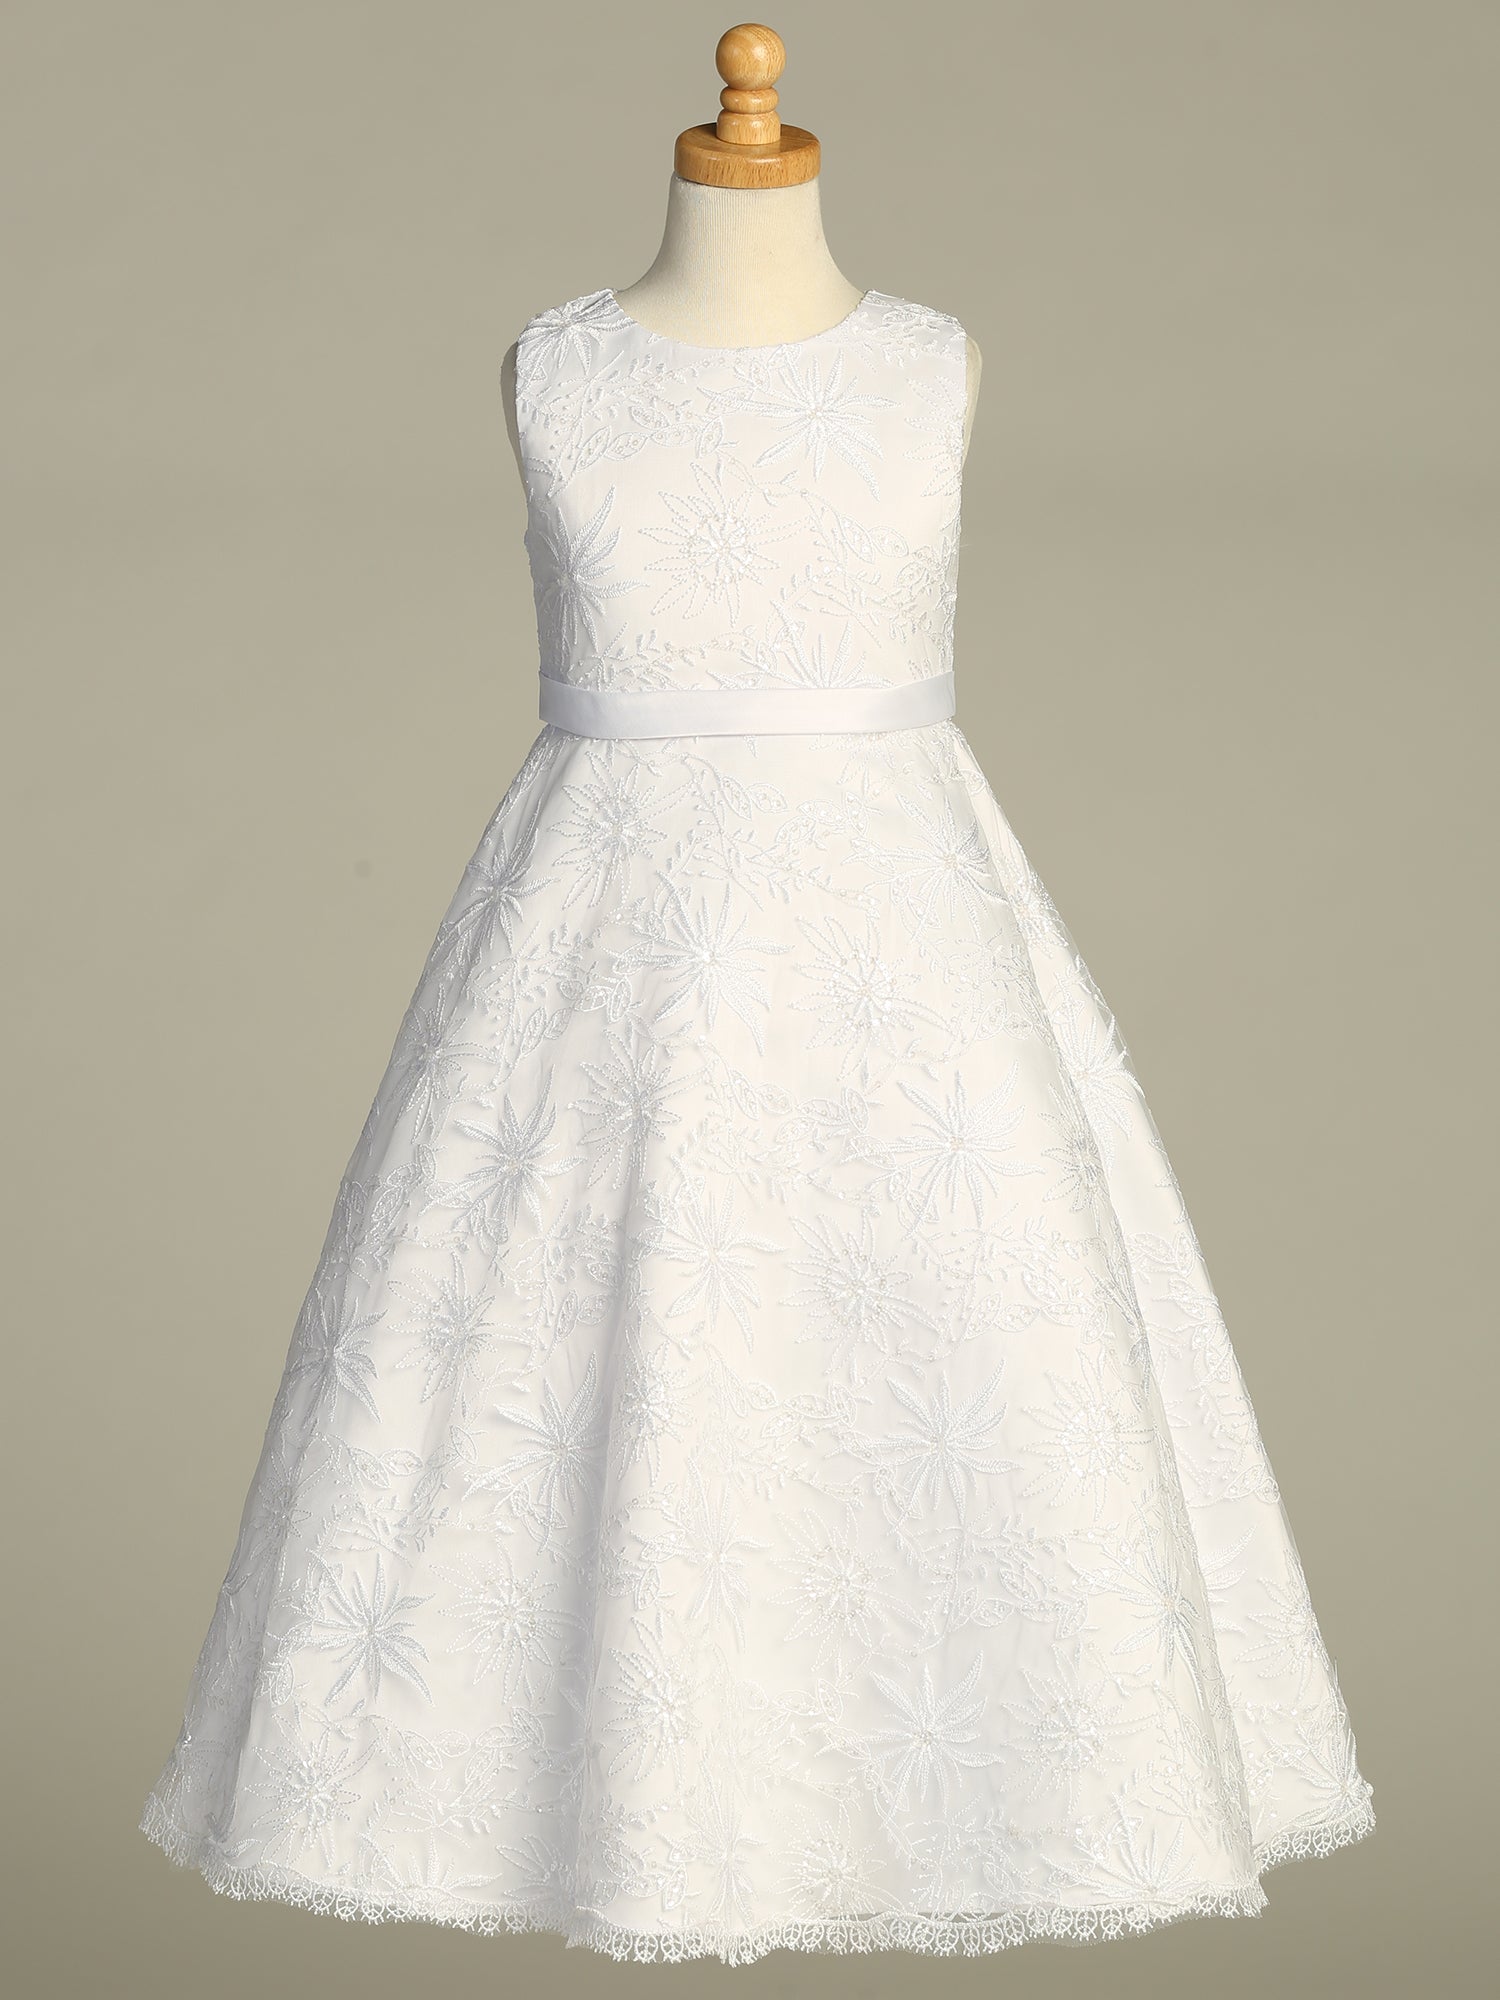 Back view of the First Communion Dress showing the zipper and tie-back tulle sash closure.